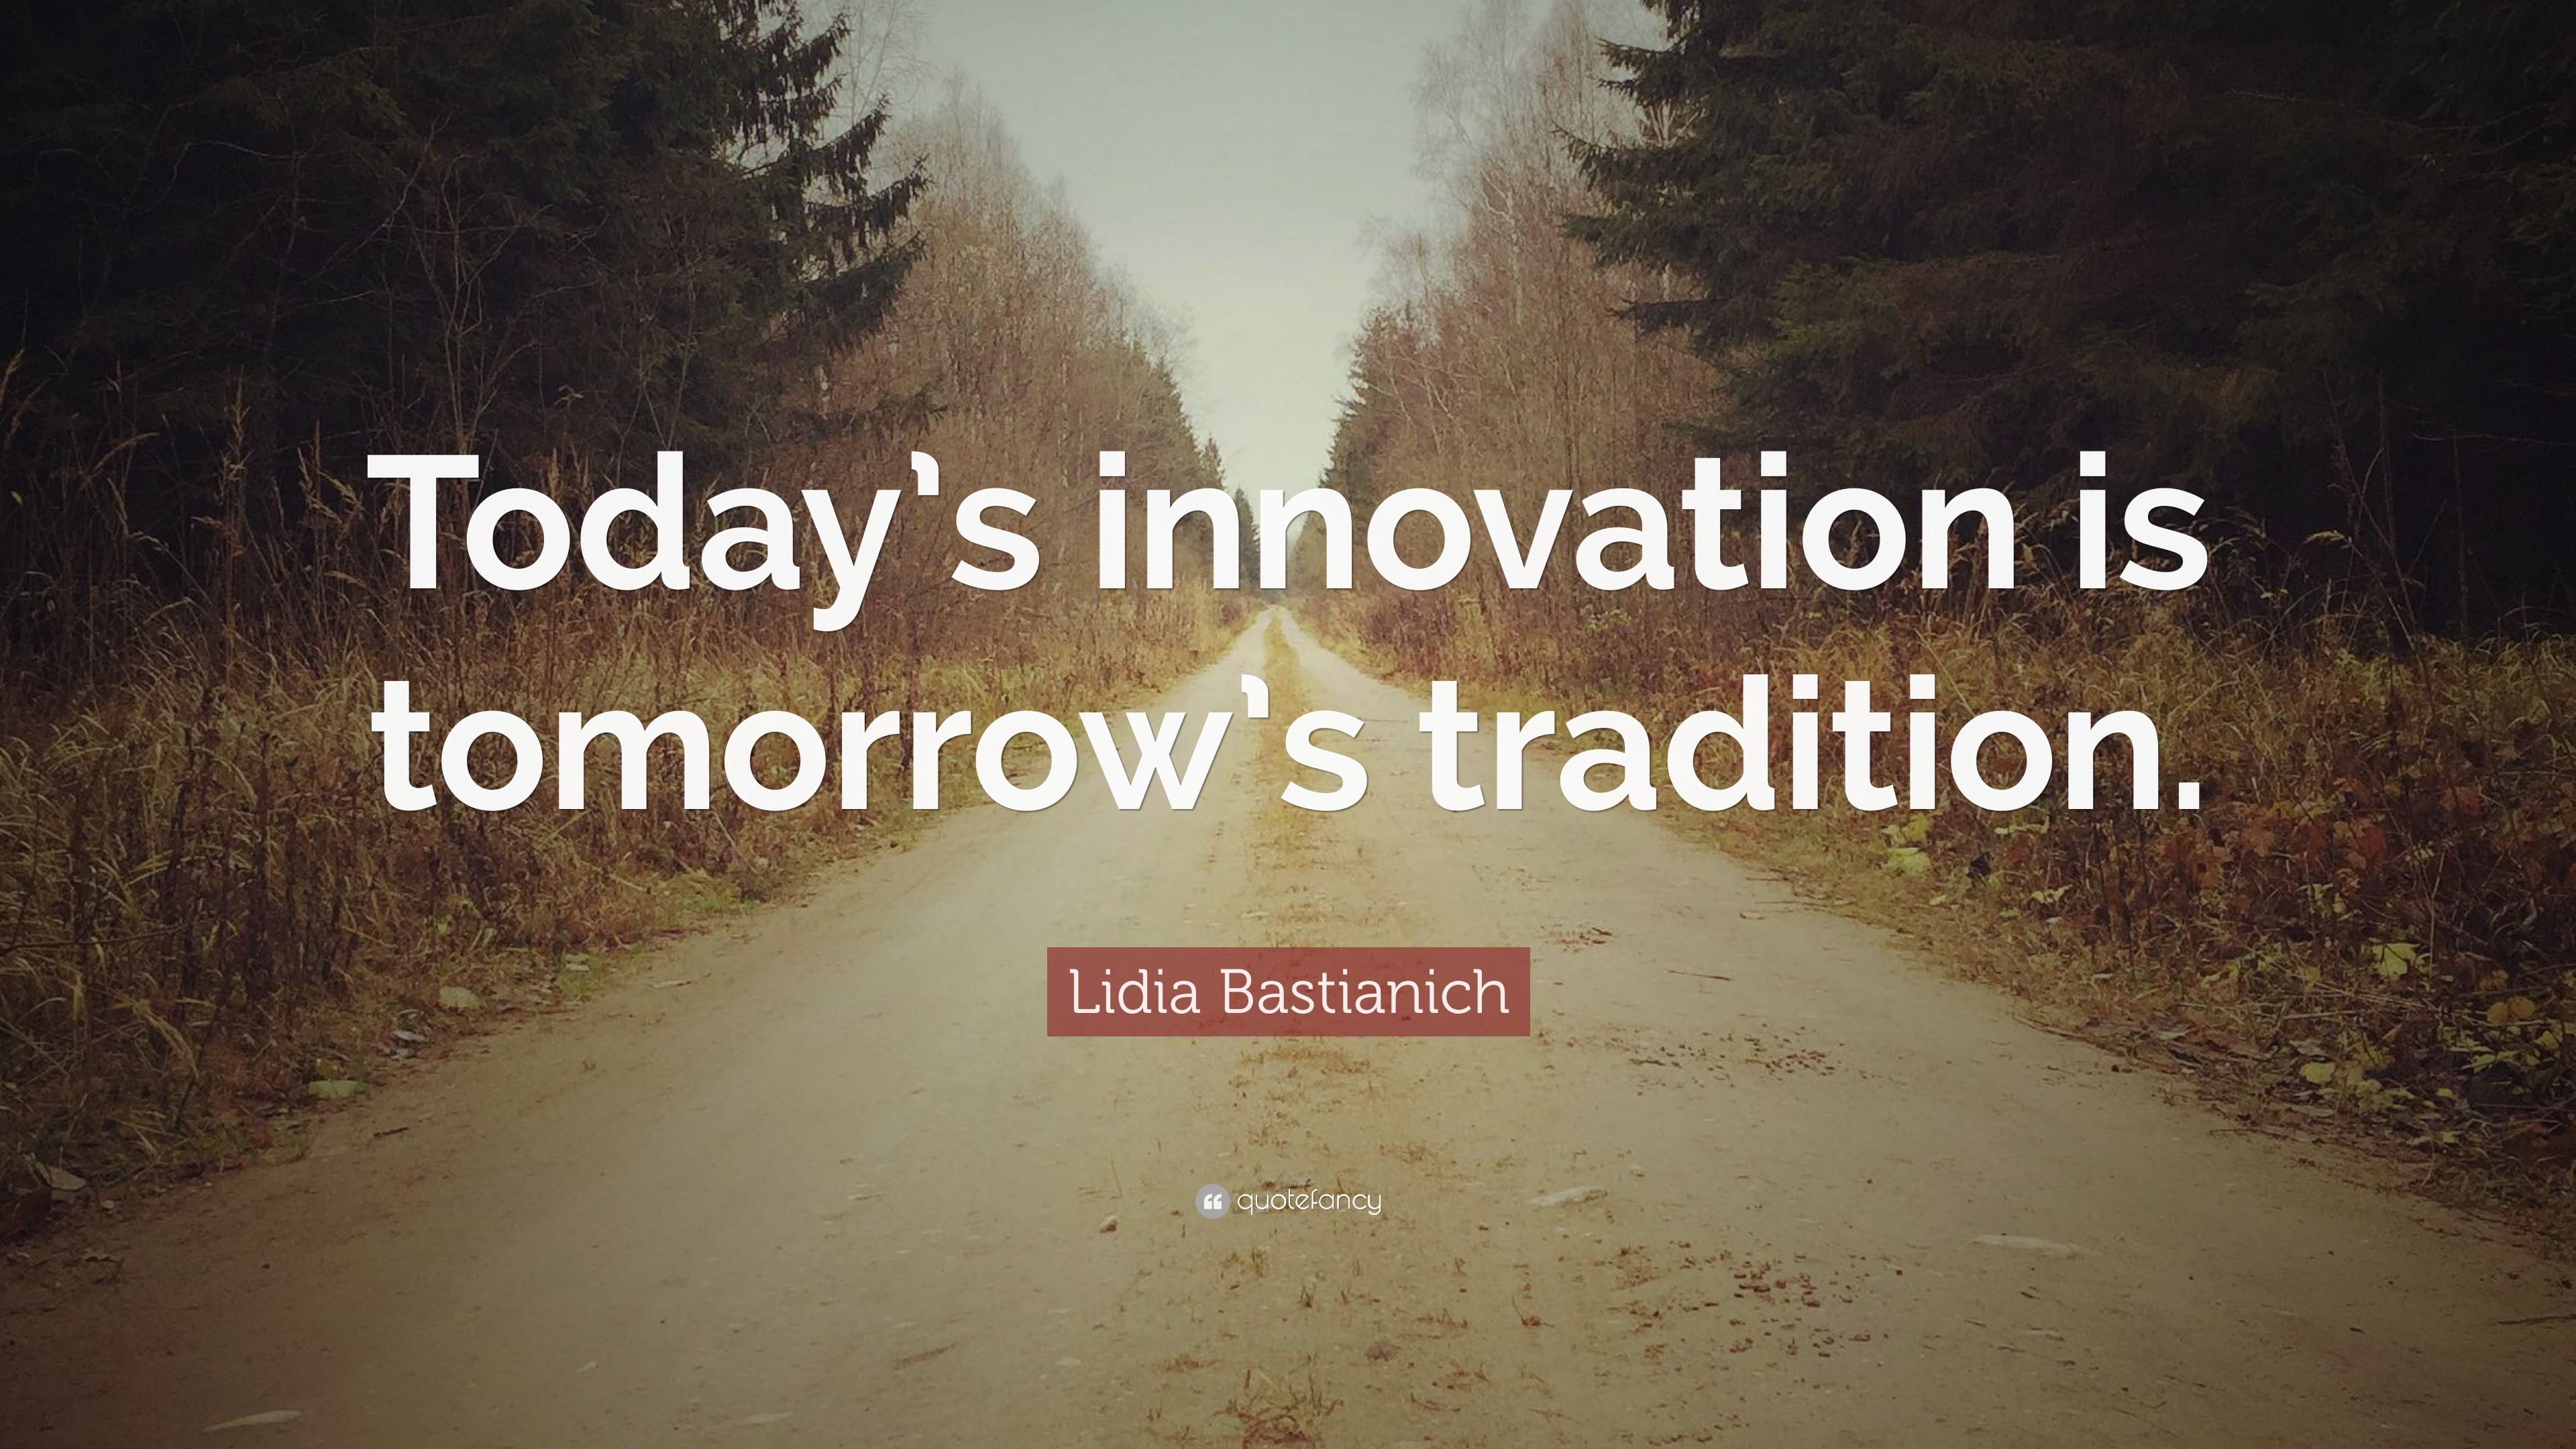 3840x2160 Lidia Bastianich Quote: “Today's innovation is tomorrow's tradition.”